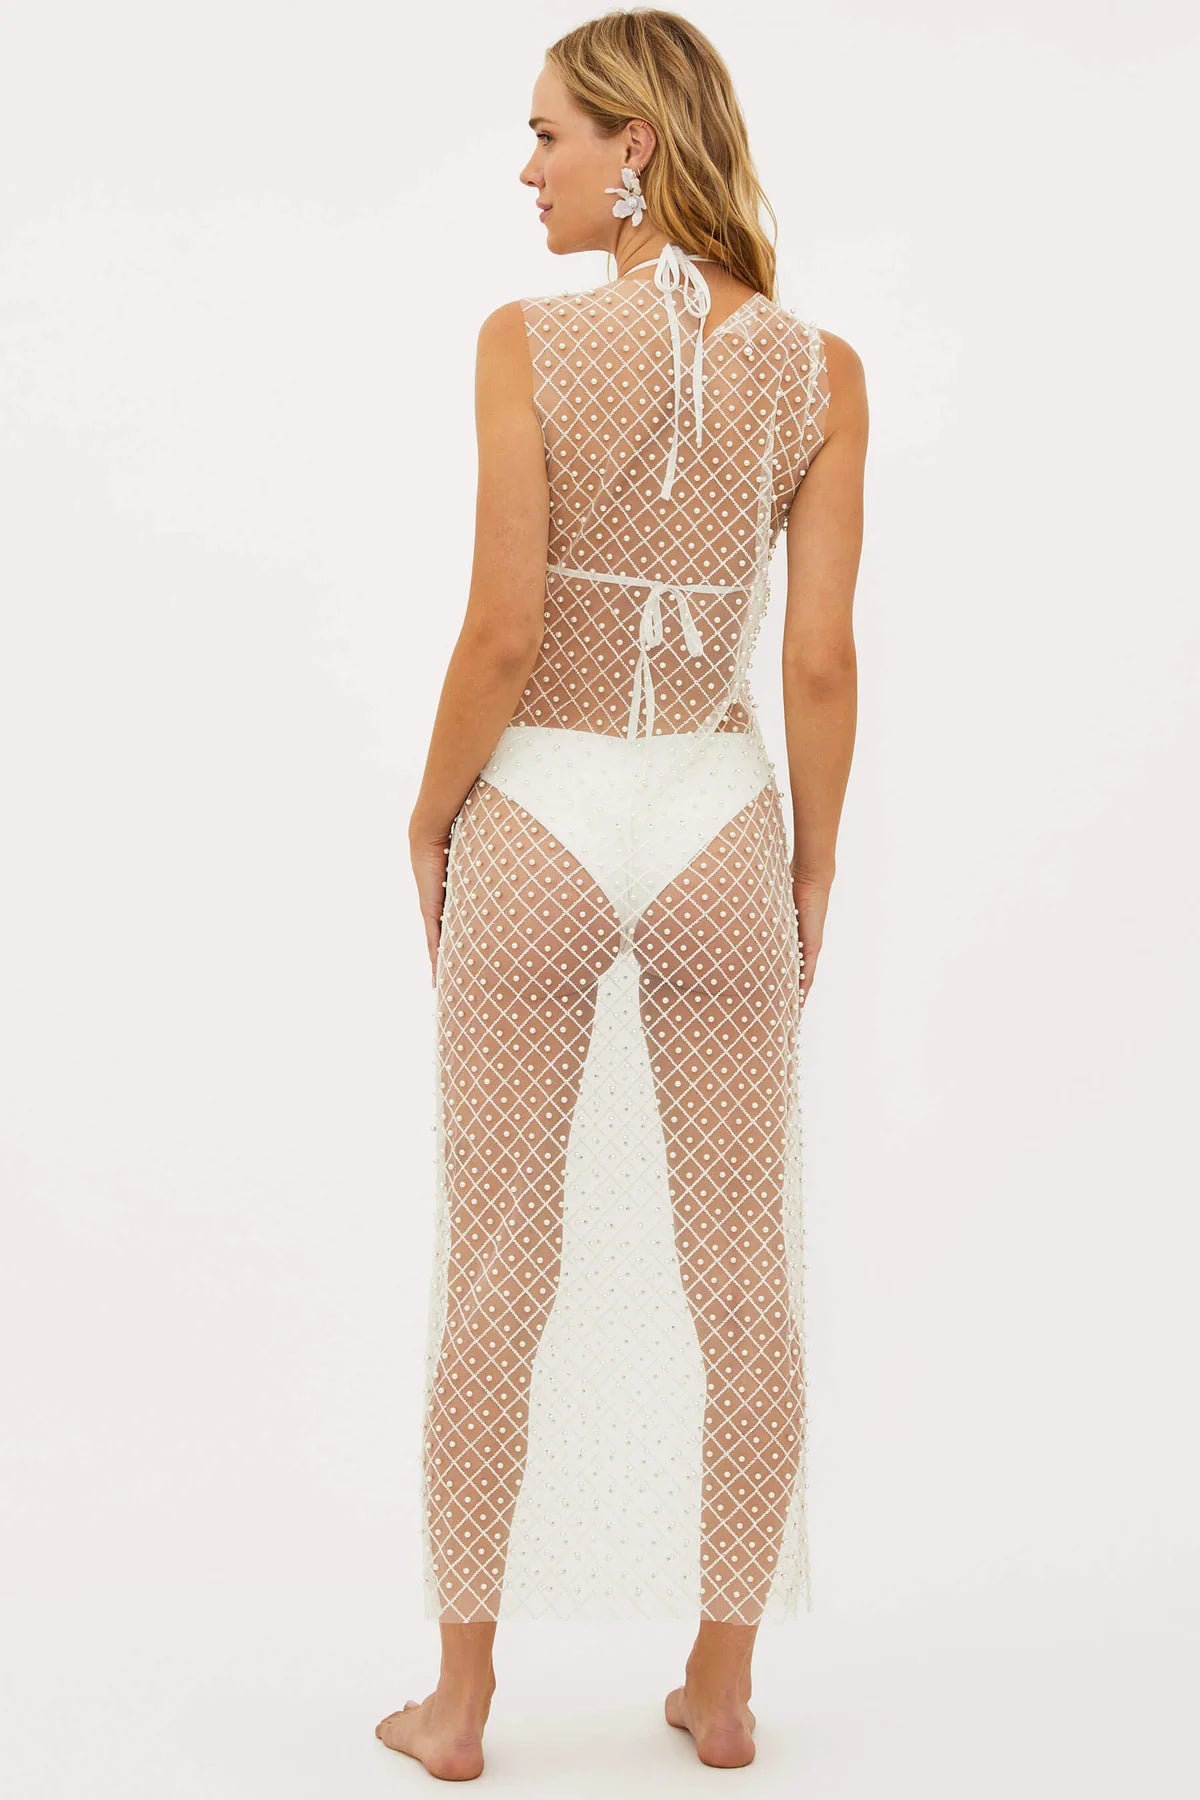 Sheer Pearl Studded Ivory Coverup Dress